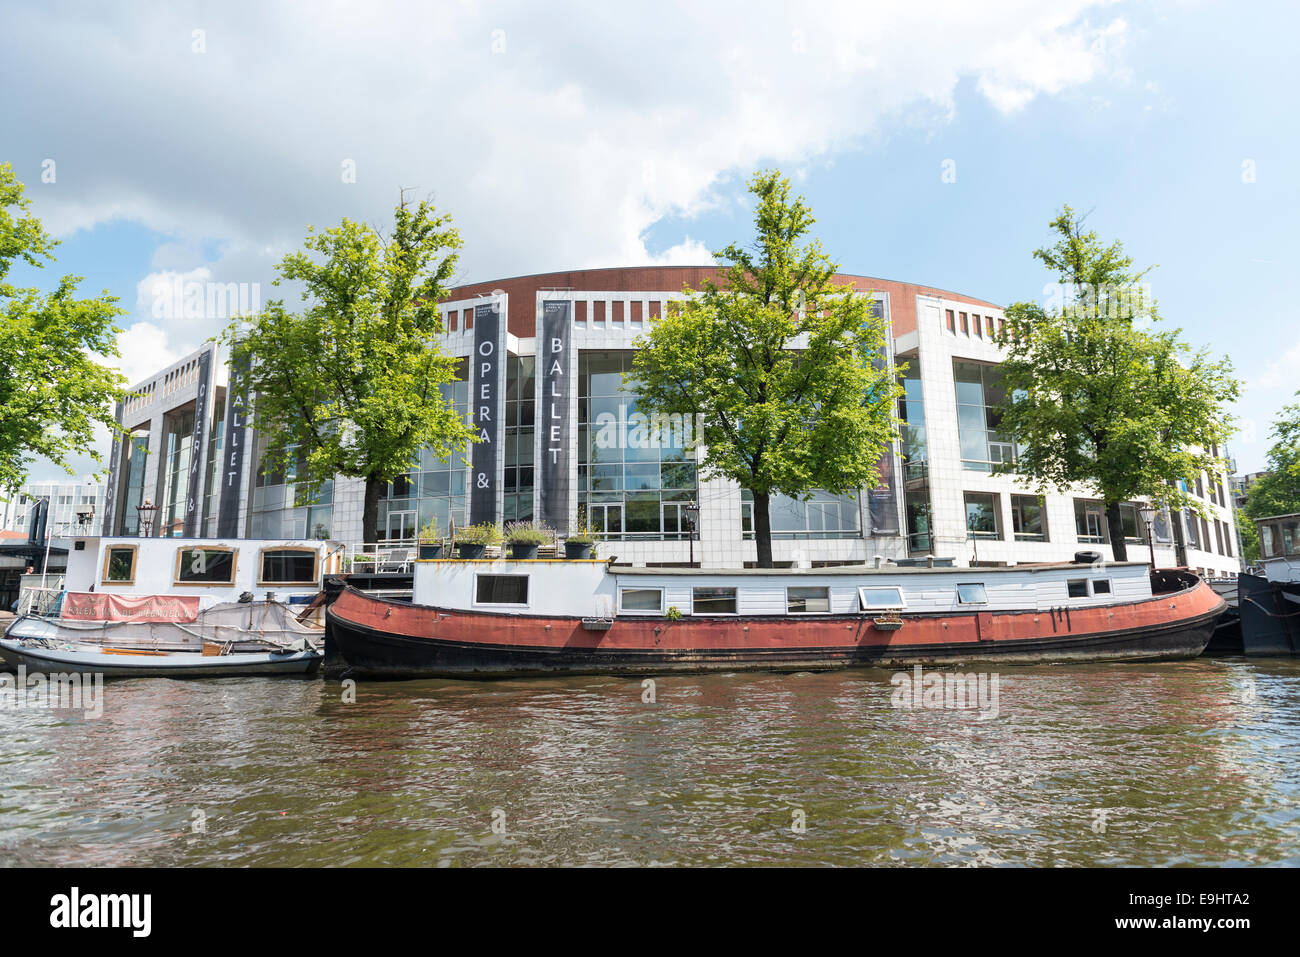 Dutch opera and ballet building seen from a canal, Amsterdam, Netherlands Stock Photo